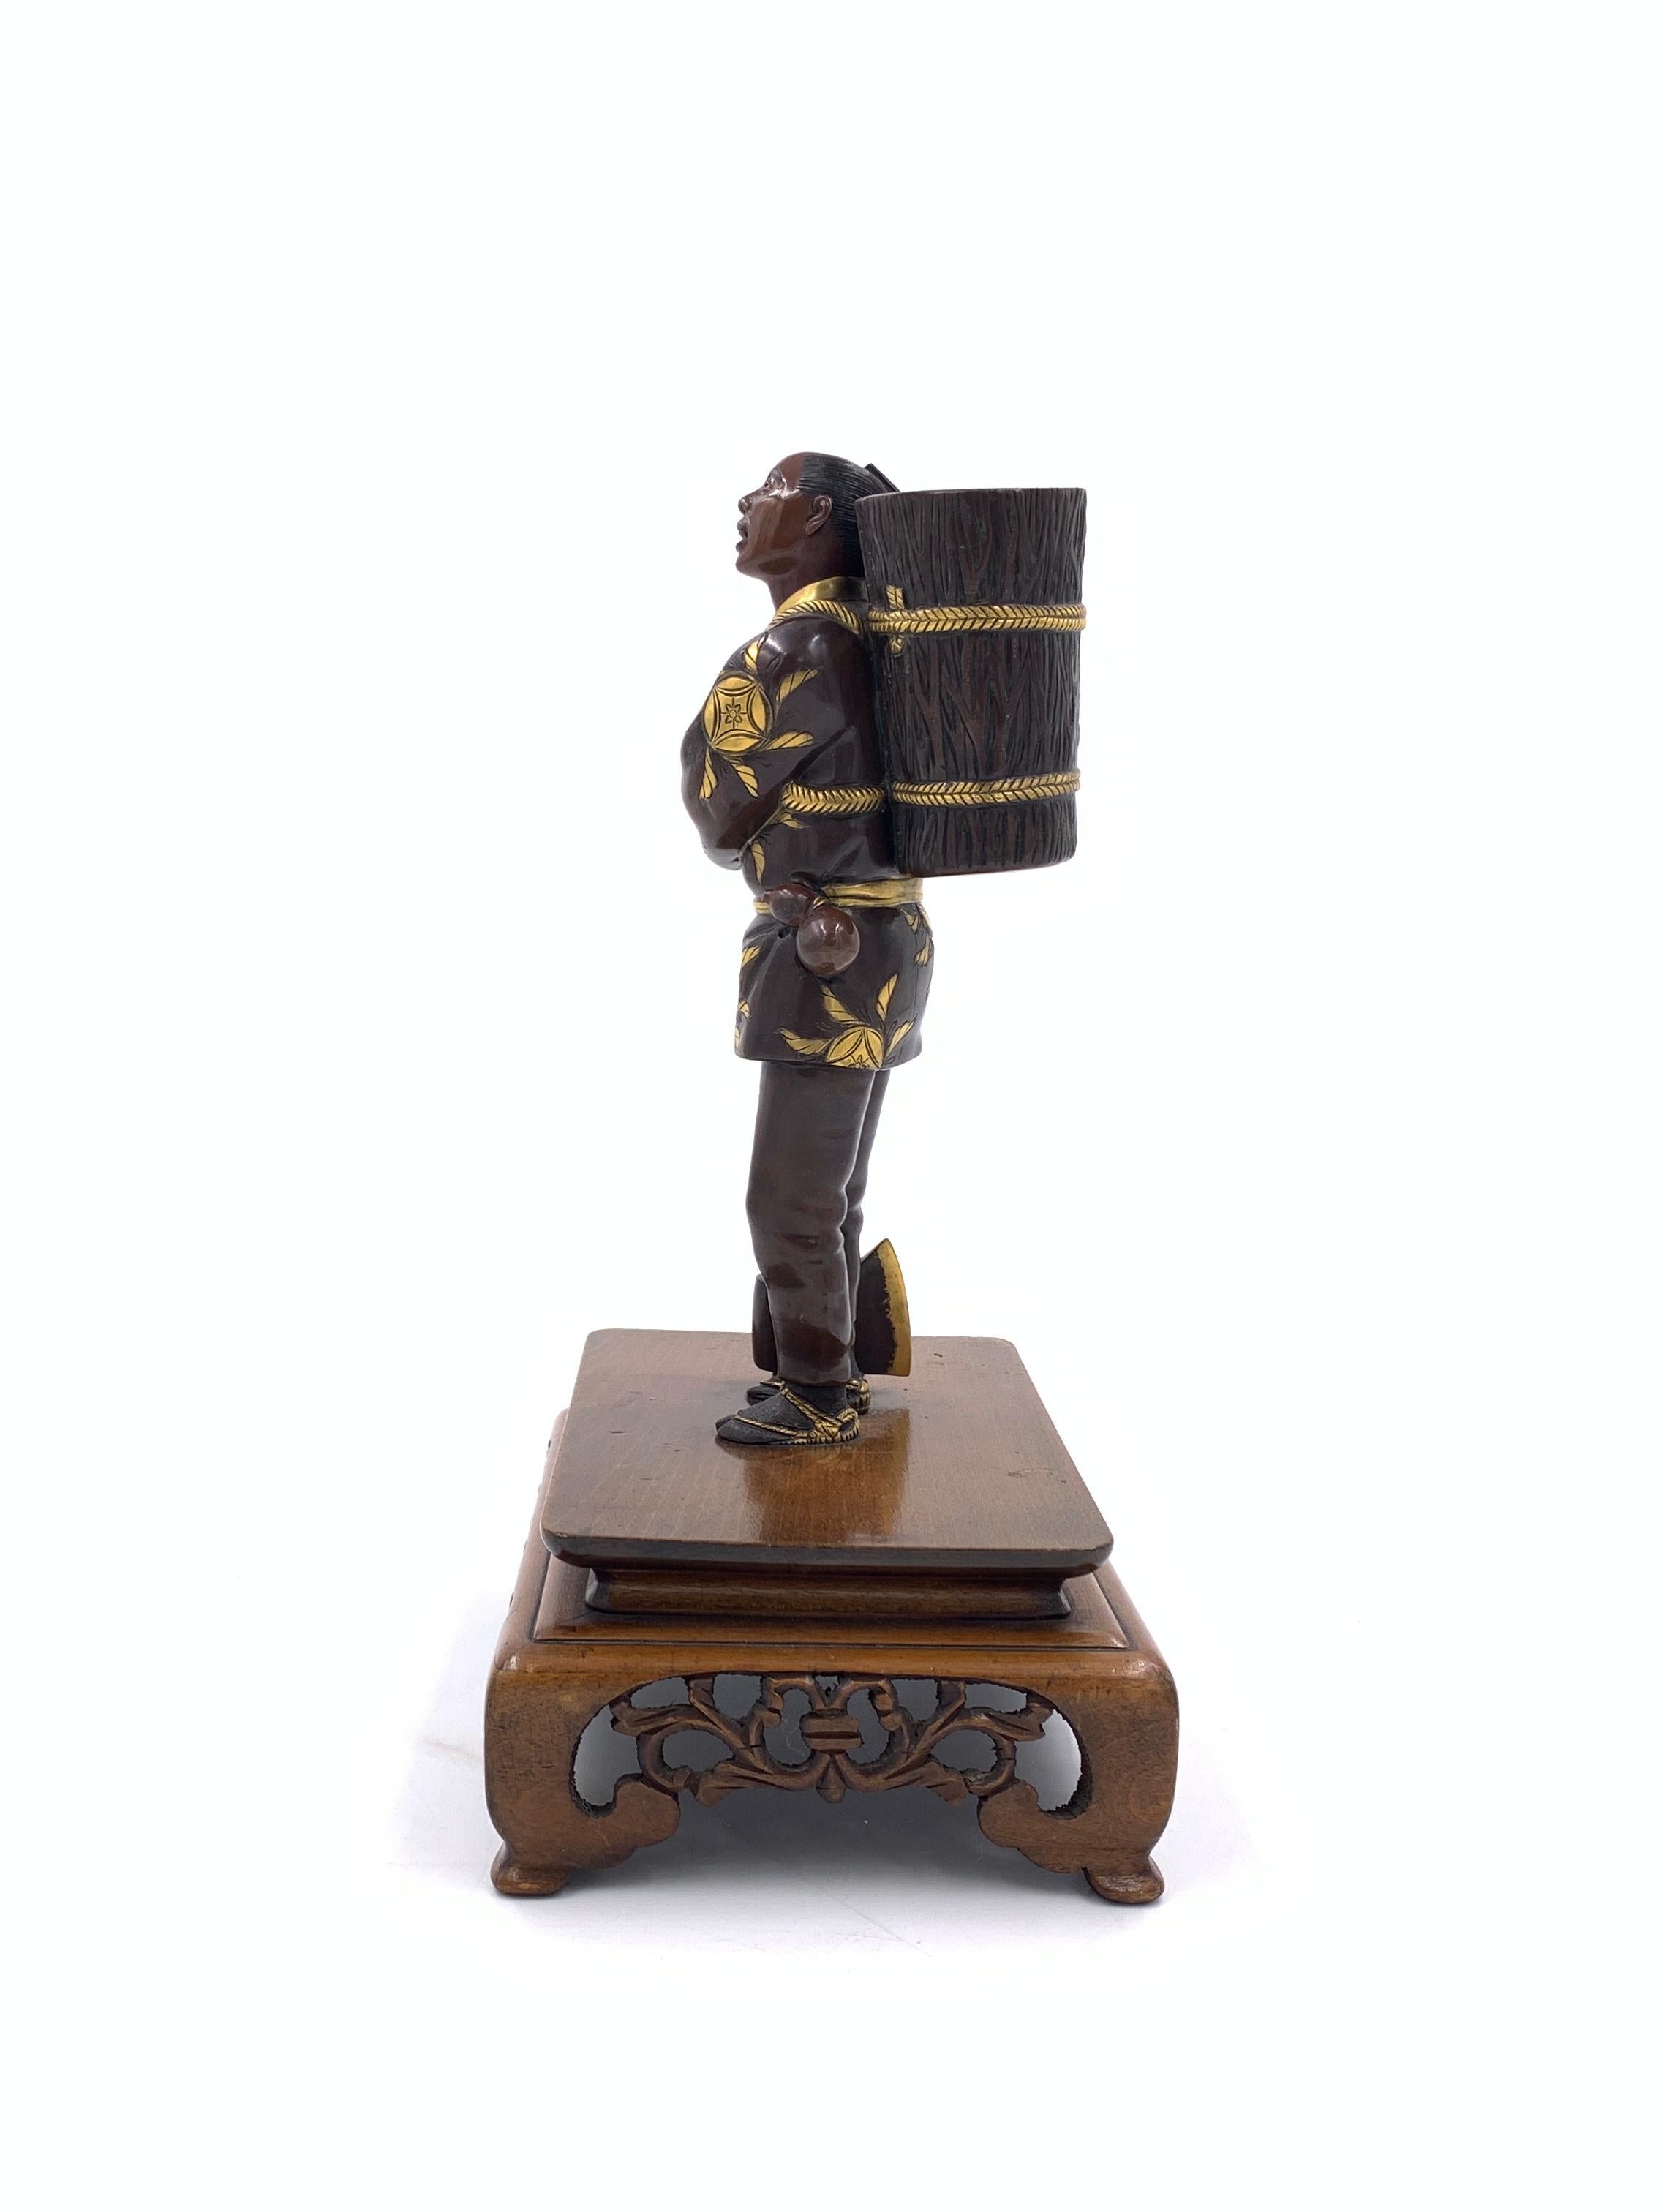 A fine signed Japanese gilt bronze figure, leans on his axe while carrying the basket on his back, signed at the base of the basket.
 